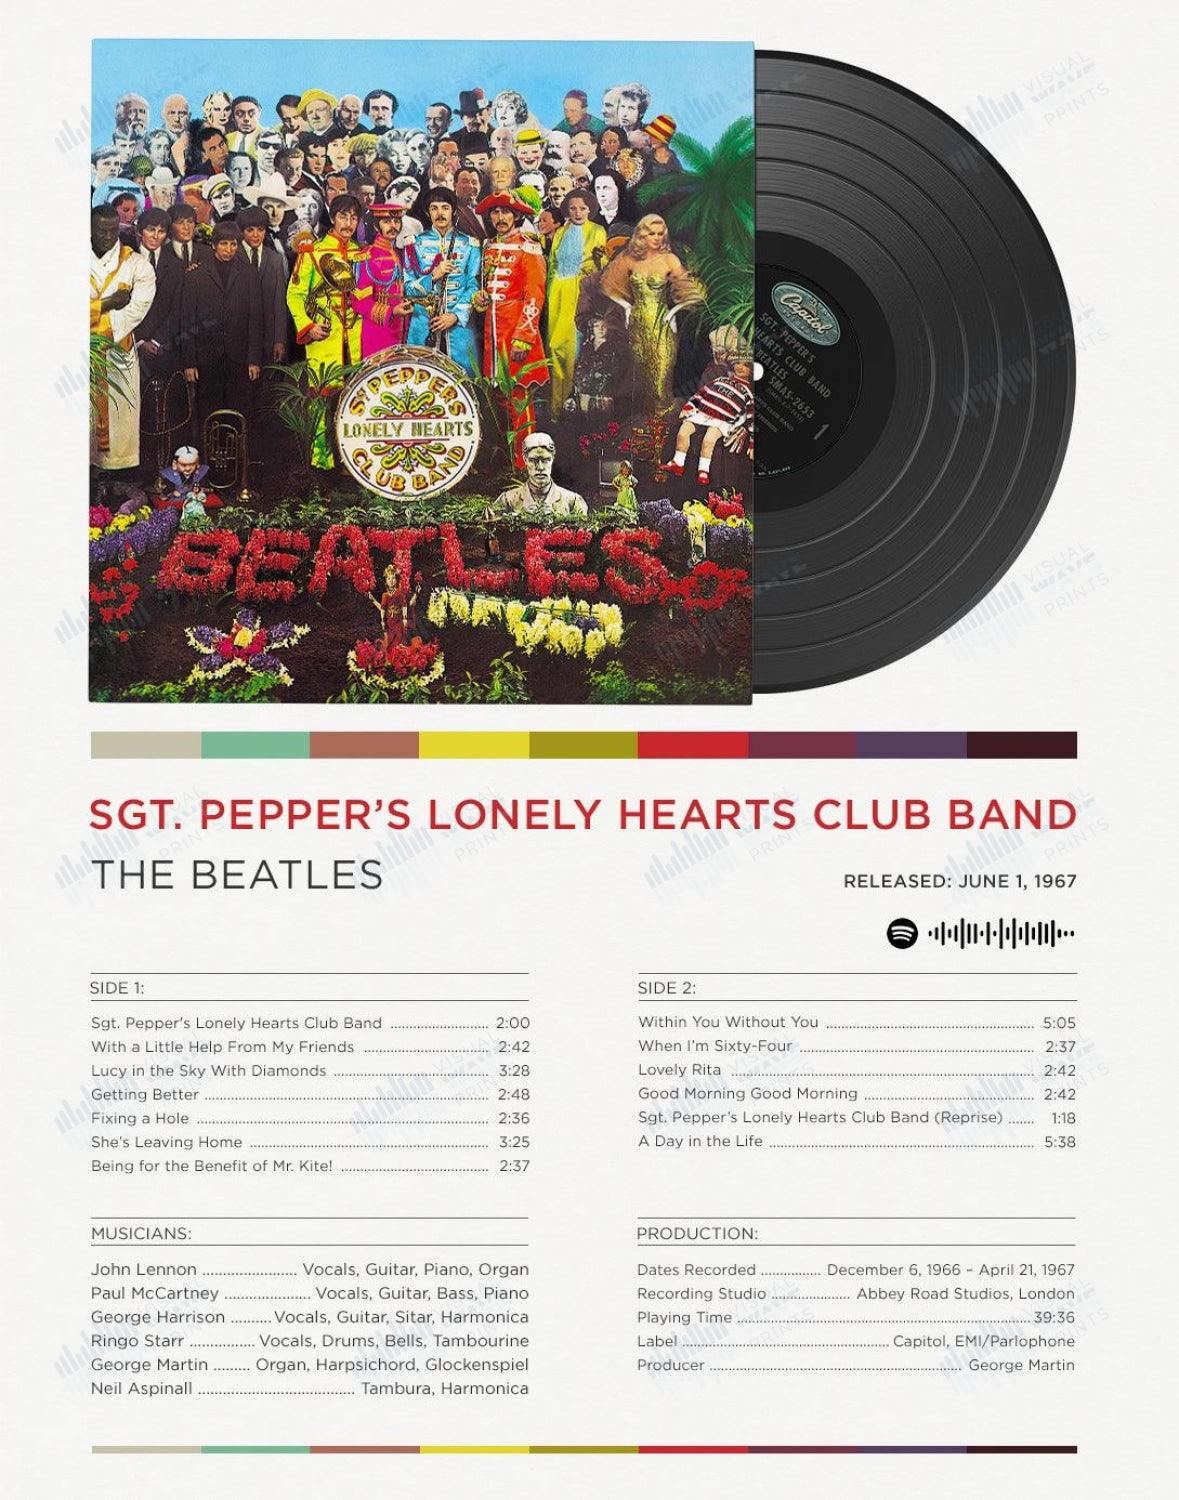 Album Art: Sgt. Pepper's Lonely Hearts Club Band by The Beatles – Visual  Wave Prints